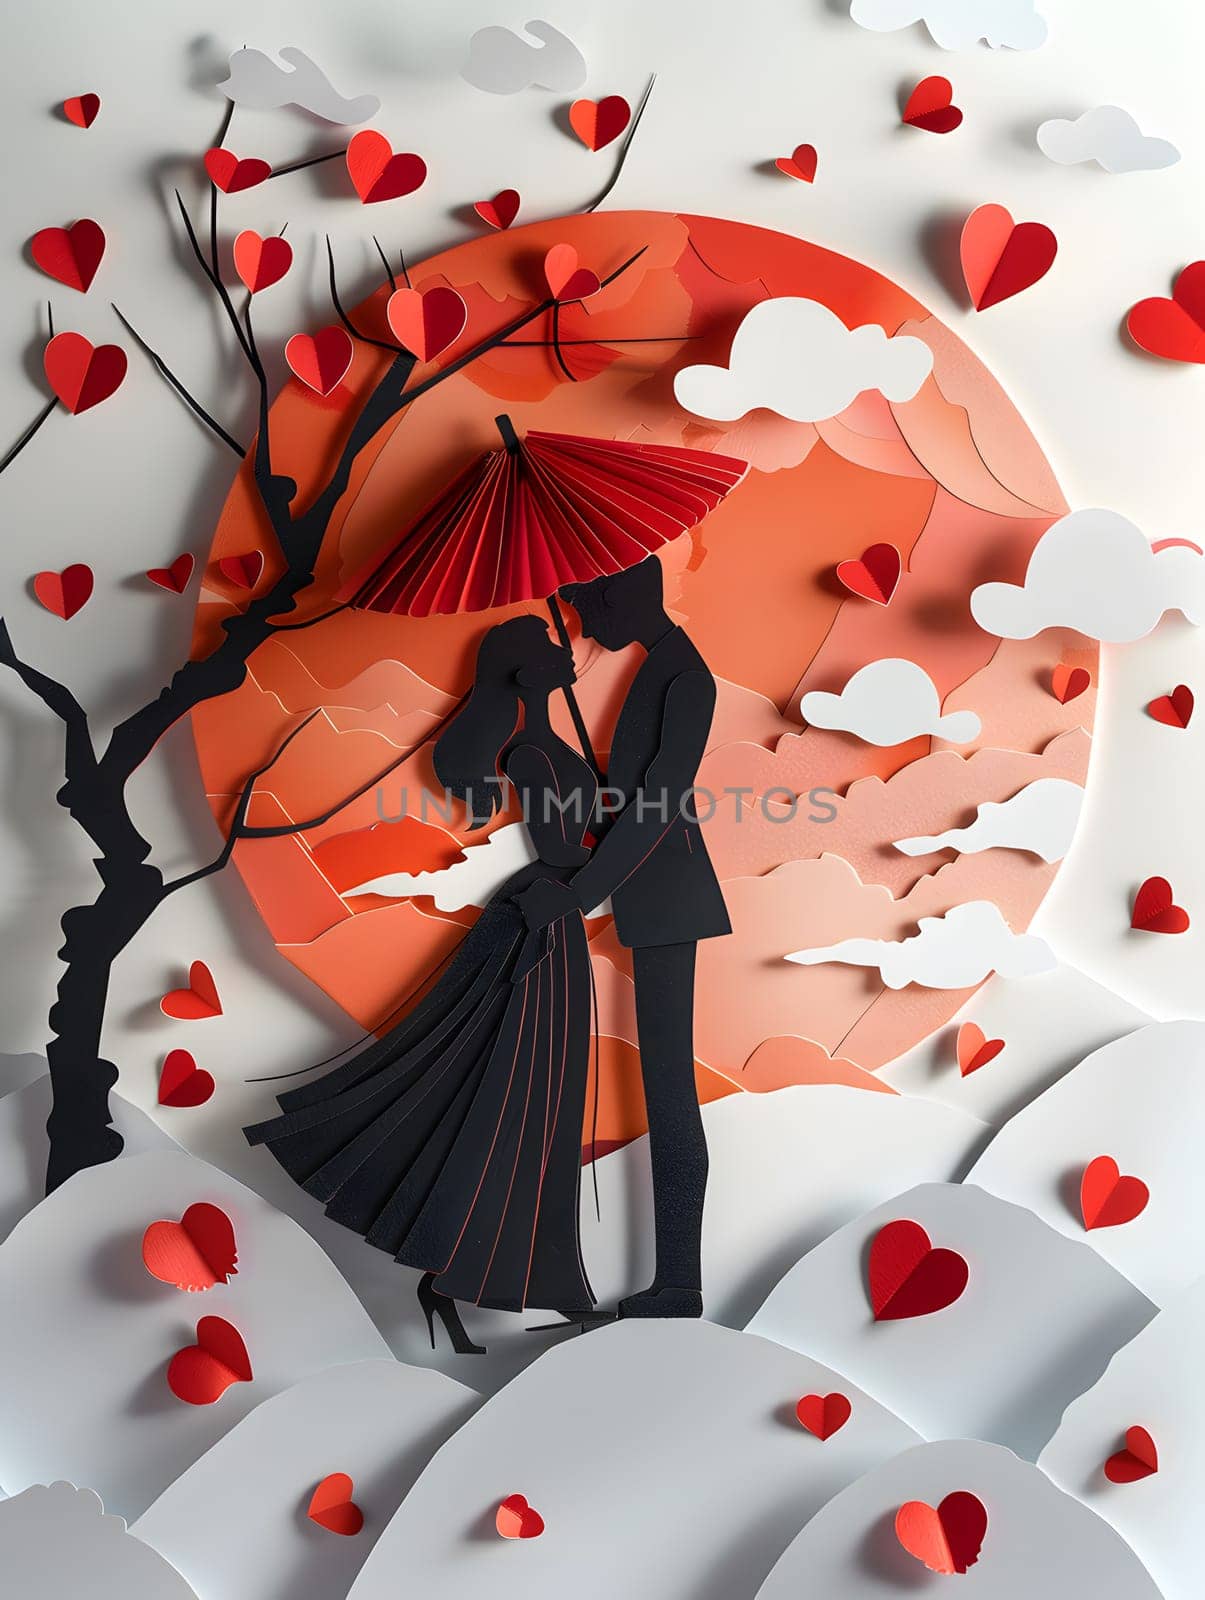 Art of a man and woman kissing under an umbrella with a red flower petal pattern by Nadtochiy